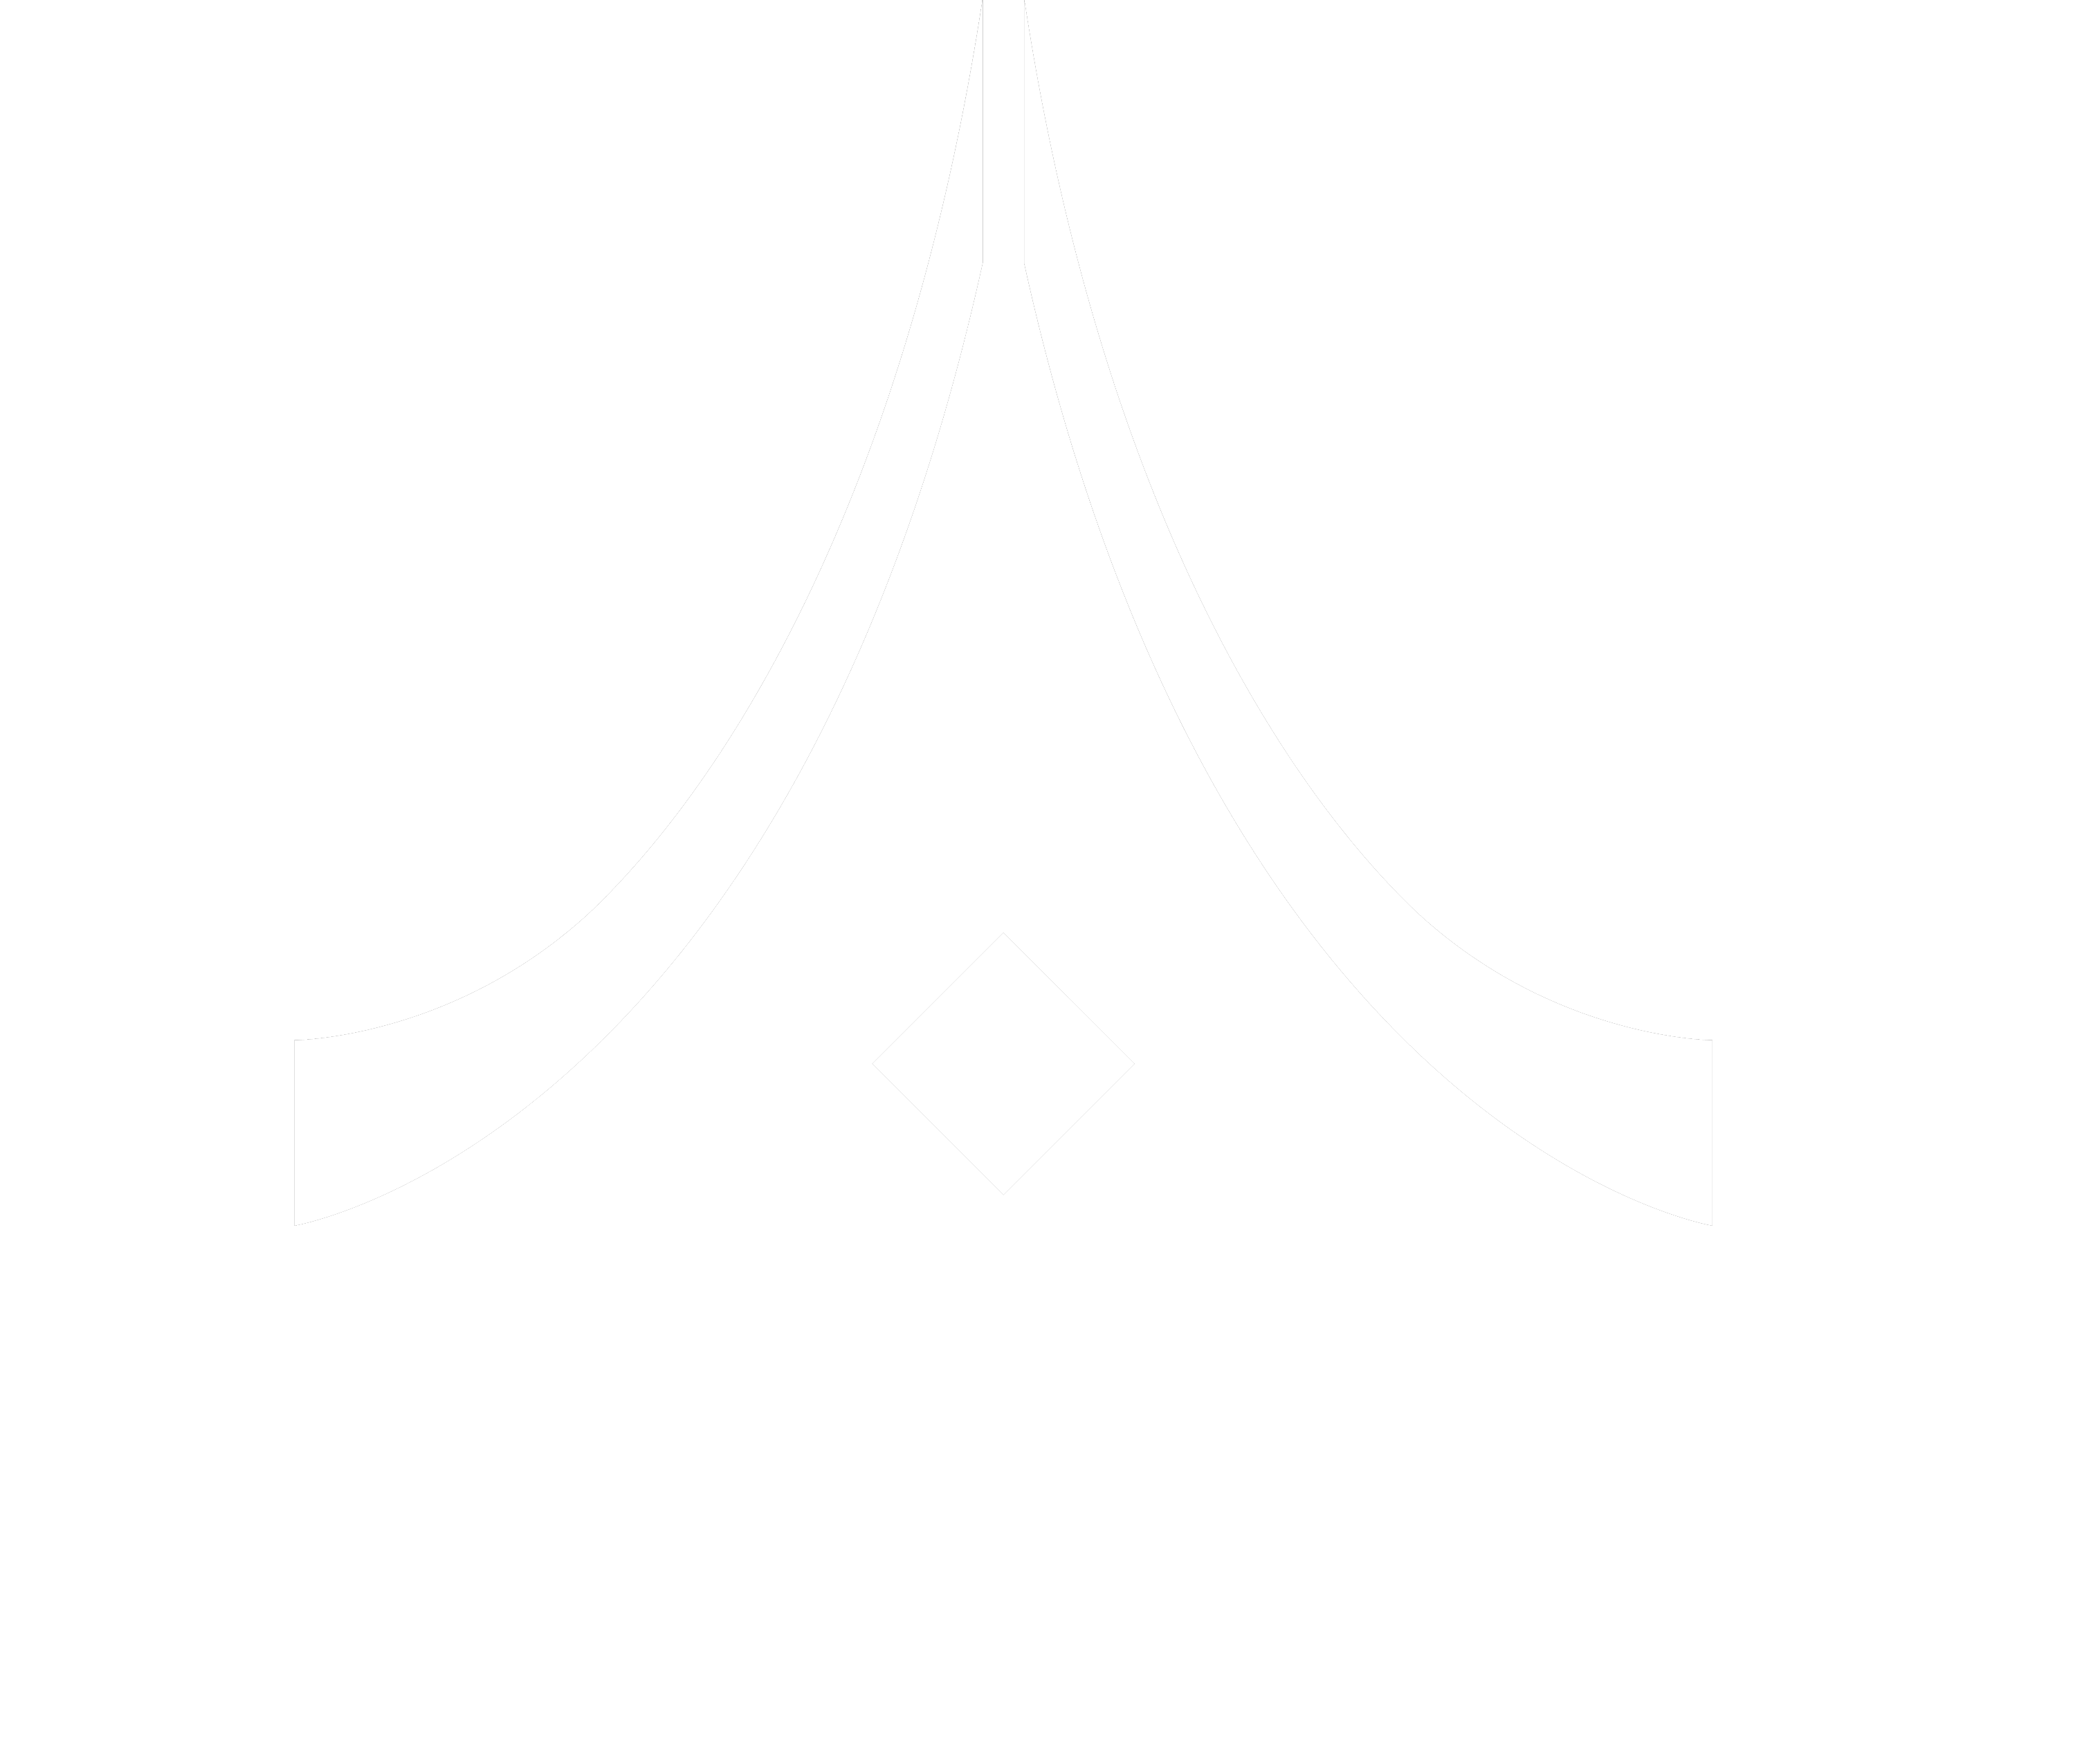 The Chiang Mai Old Town Logo